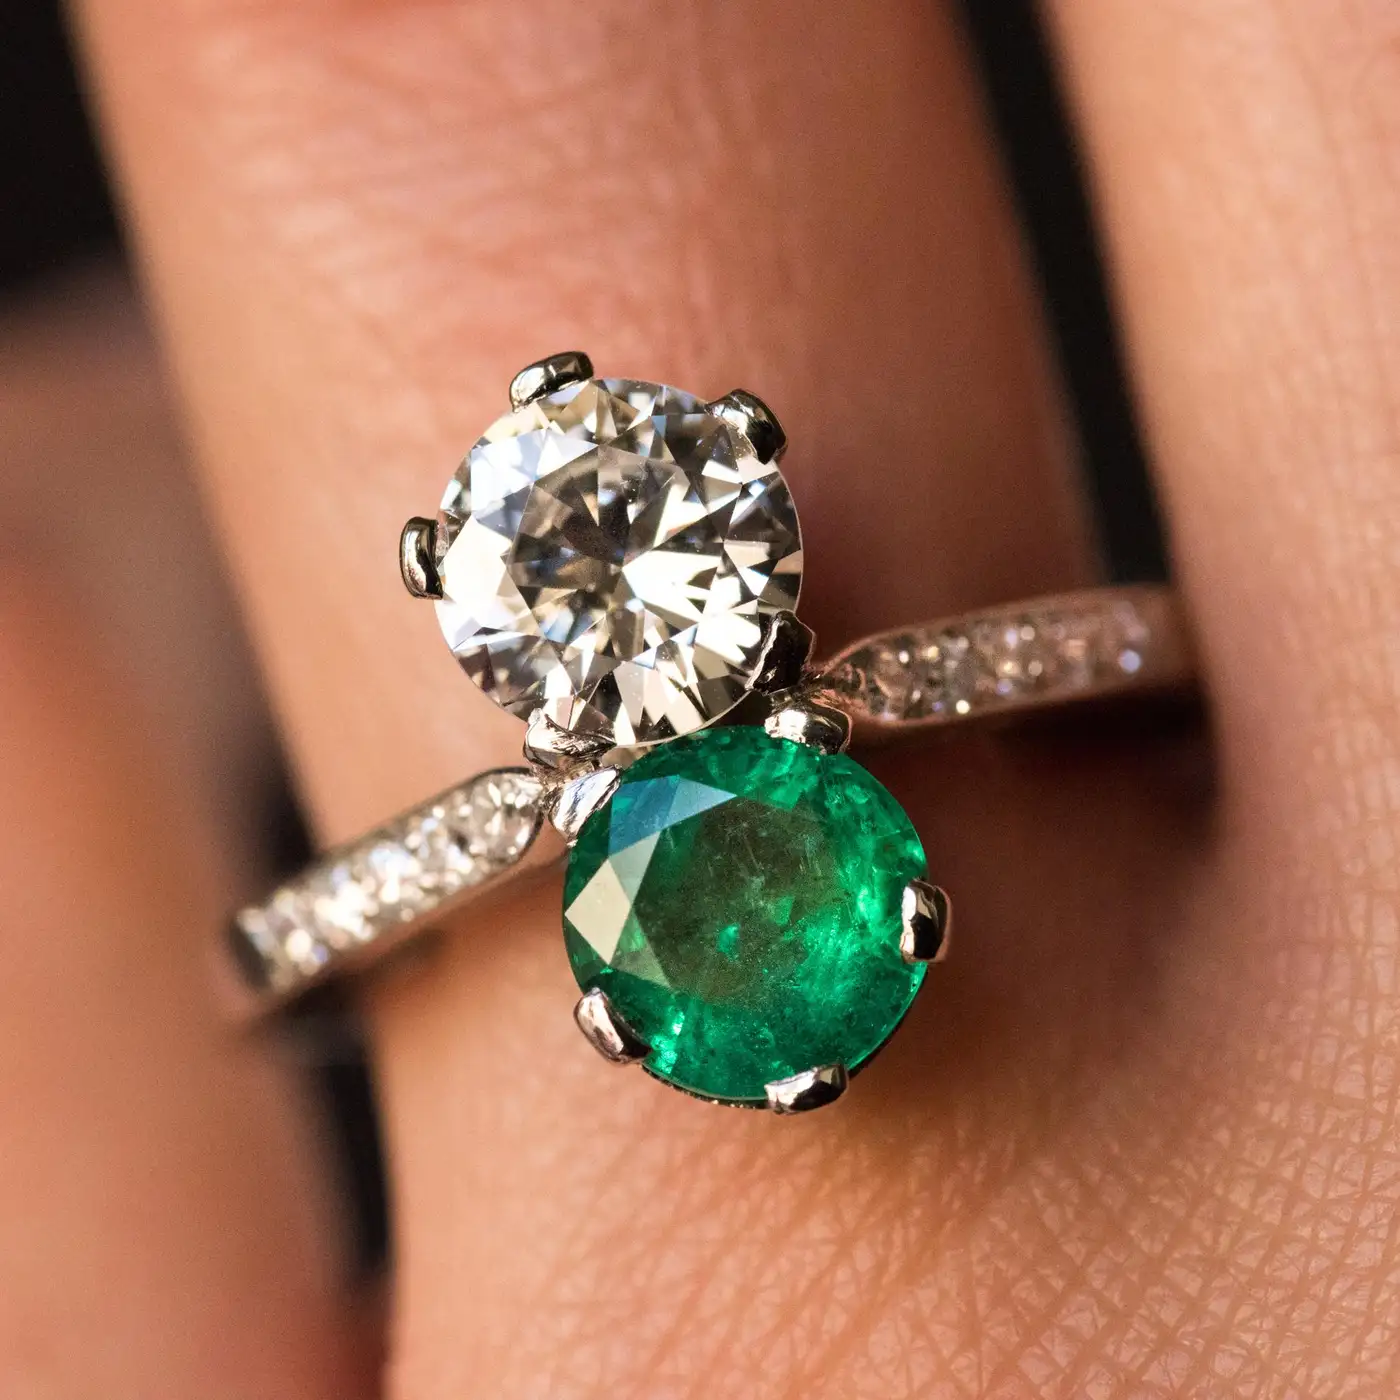 1930s-French-Platinum-Art-Deco-Emerald-Diamond-You-and-Me-Ring-3.webp